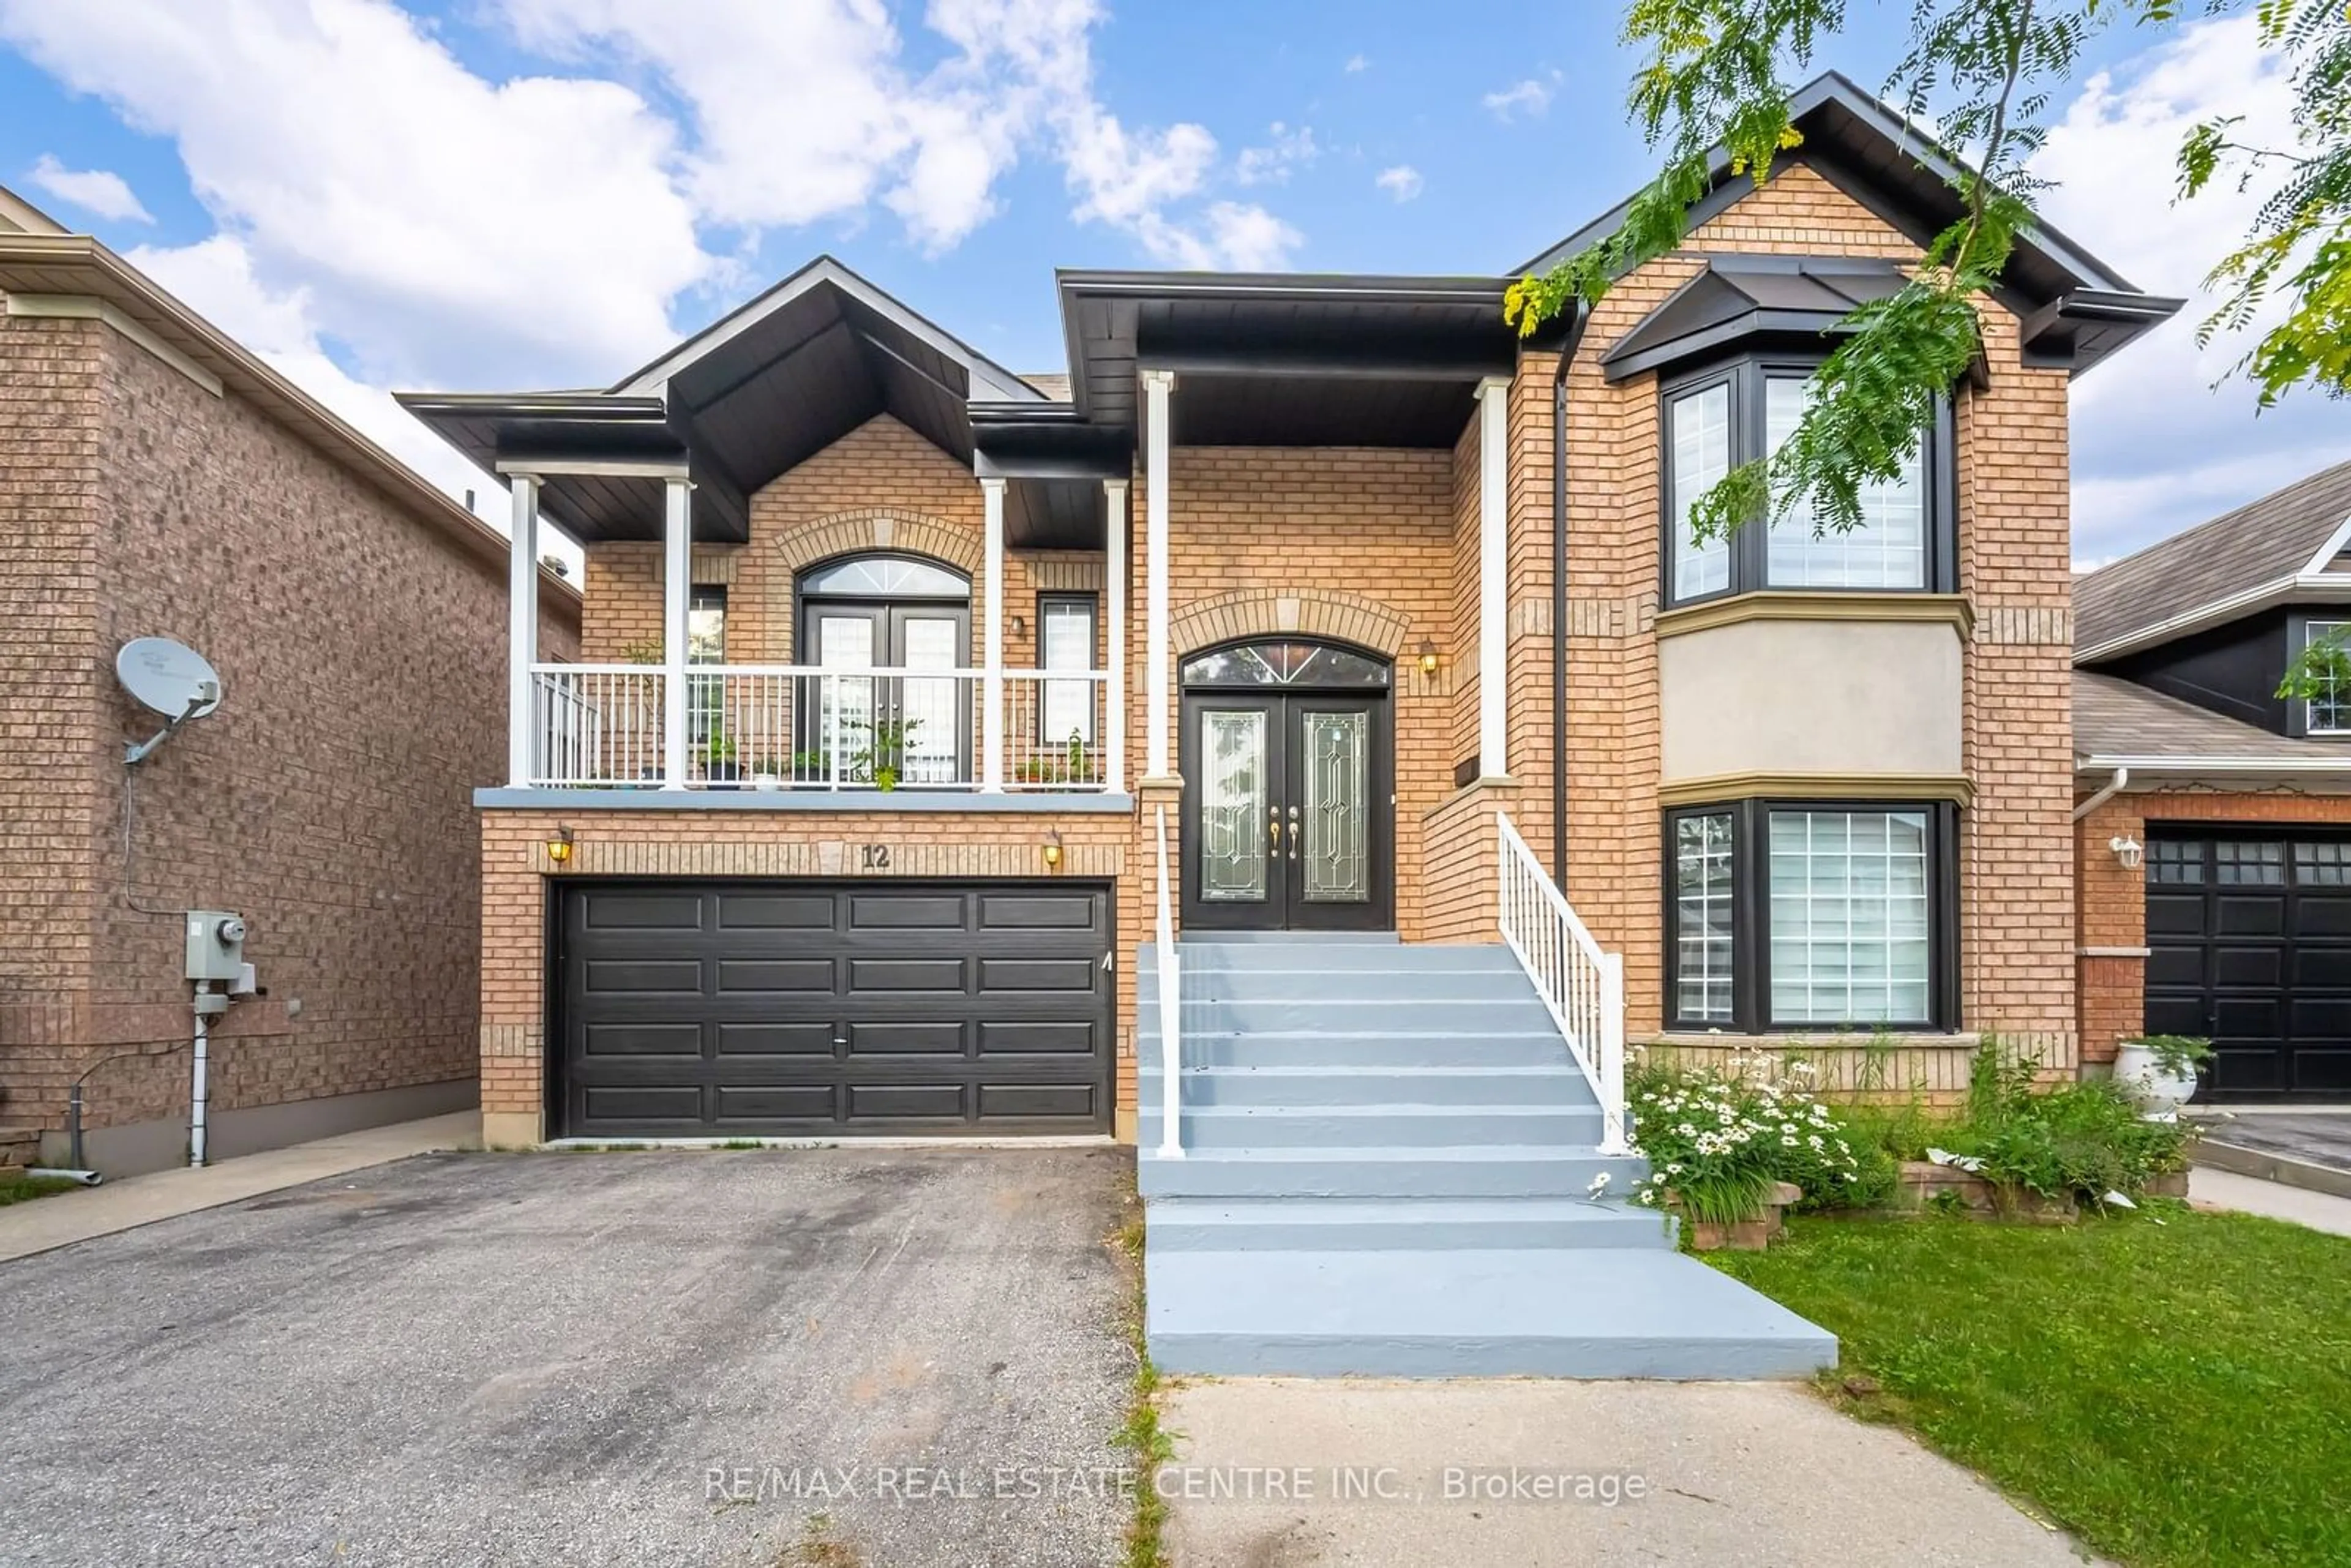 Home with brick exterior material for 12 Sheldon Dr, Ajax Ontario L1T 4K7